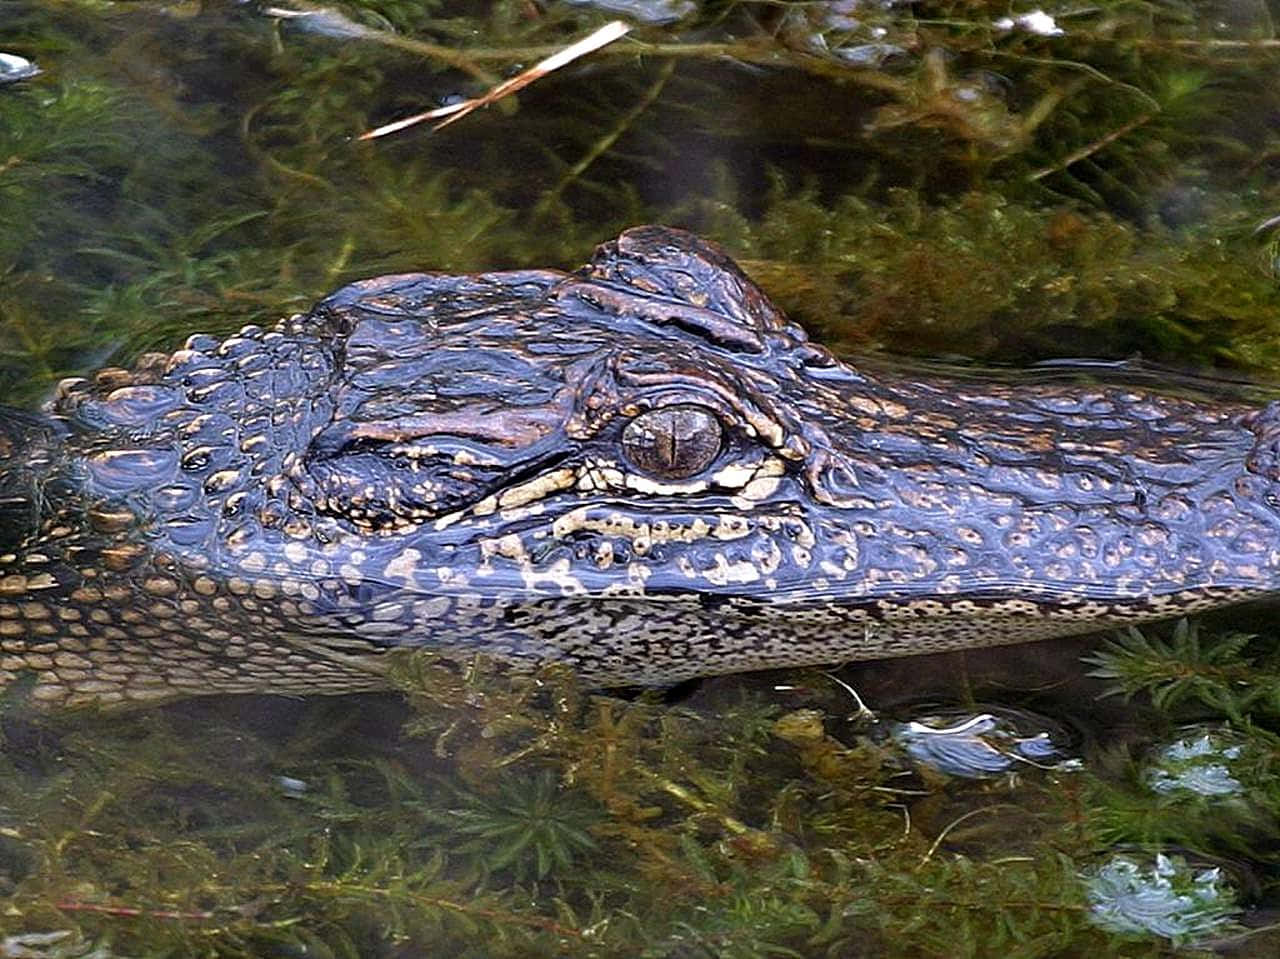 An intimidating alligator spotted near the wetlands